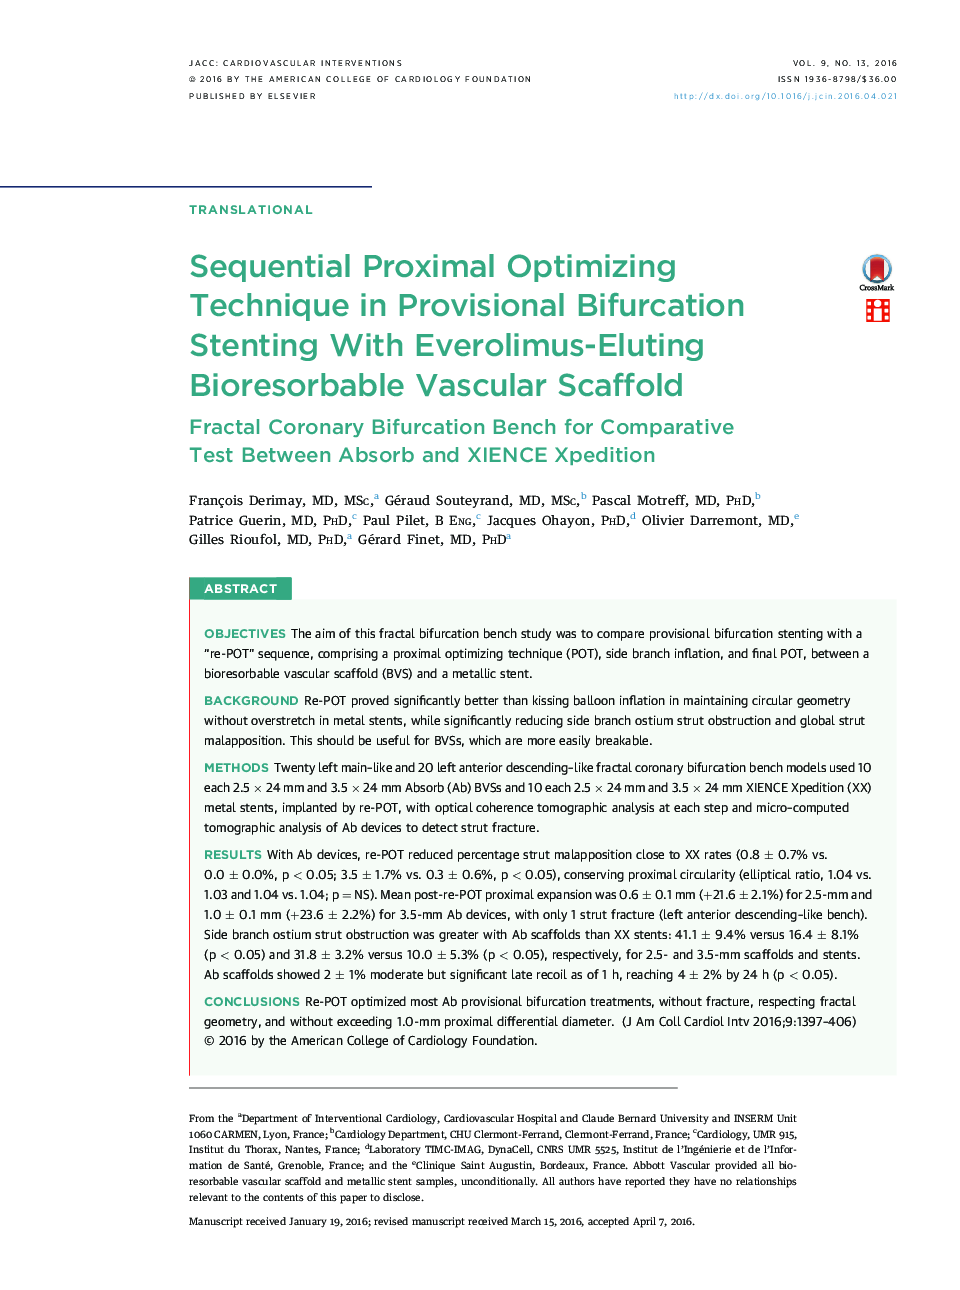 Sequential Proximal Optimizing Technique in Provisional Bifurcation Stenting With Everolimus-Eluting Bioresorbable Vascular Scaffold : Fractal Coronary Bifurcation Bench for Comparative Test Between Absorb and XIENCE Xpedition